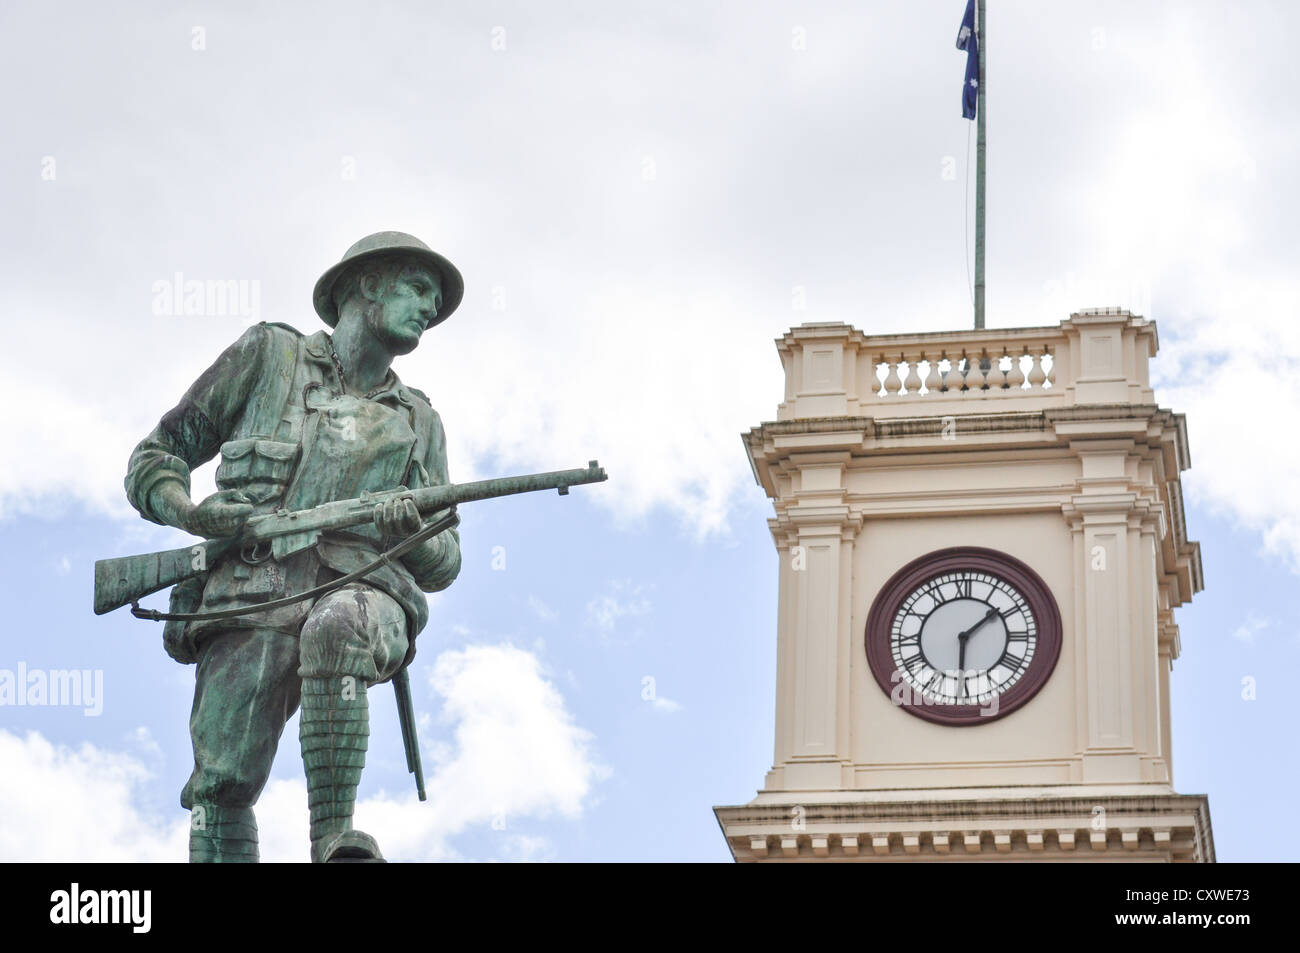 Frozen in time - a war memorial and clock tower in Maryborough, Australia. Stock Photo